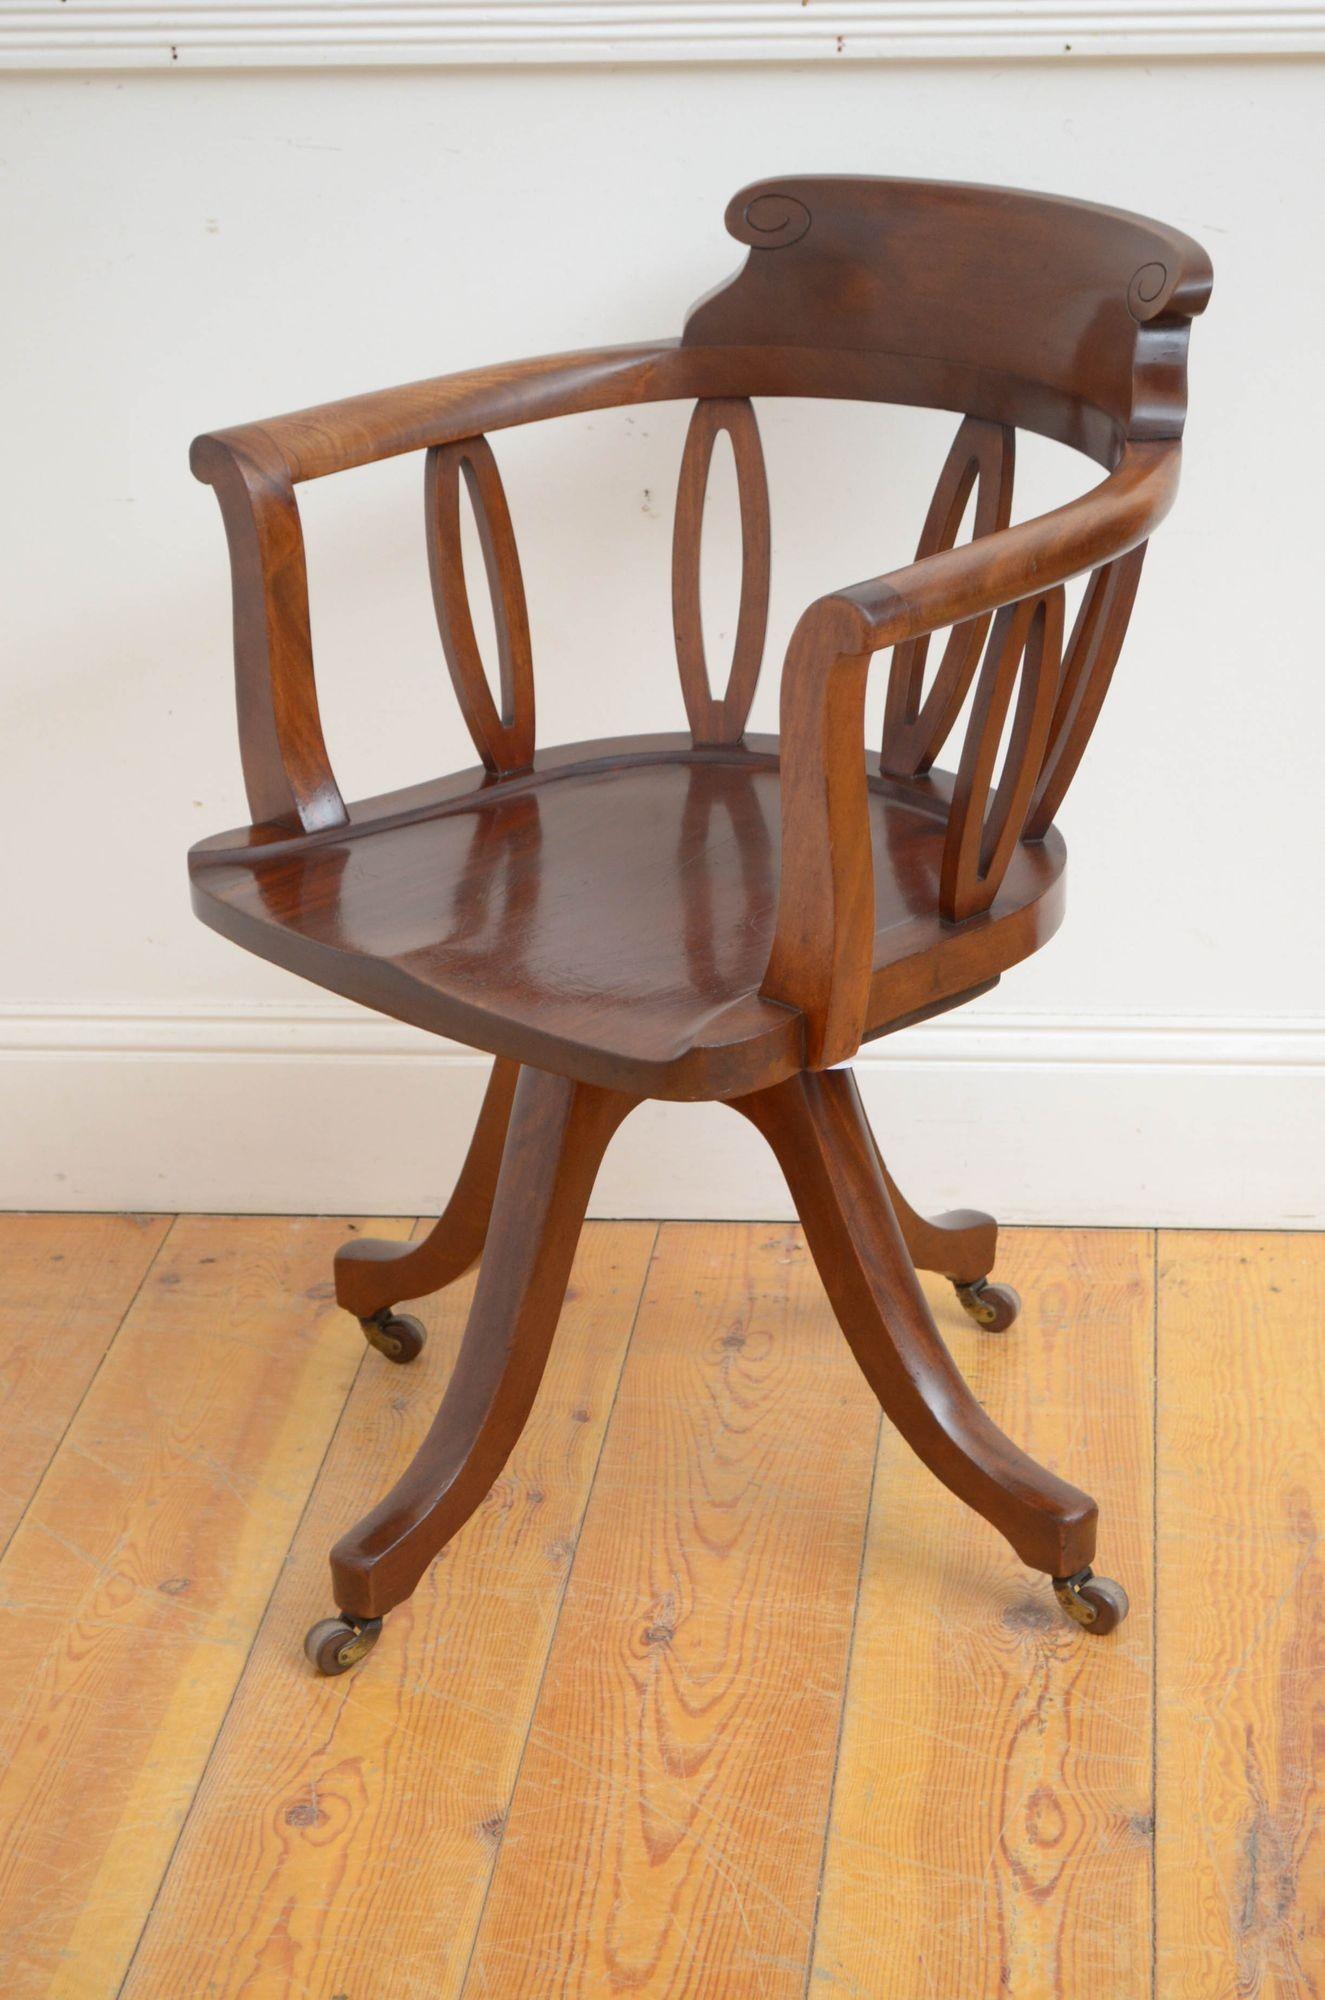 Sn5425 An English Victorian solid mahogany desk chair, having shaped top rail with carved uprights, generous seat and open scroll arms, all standing on four cabriole les terminating in brass castors. This antique chair in home ready condition.